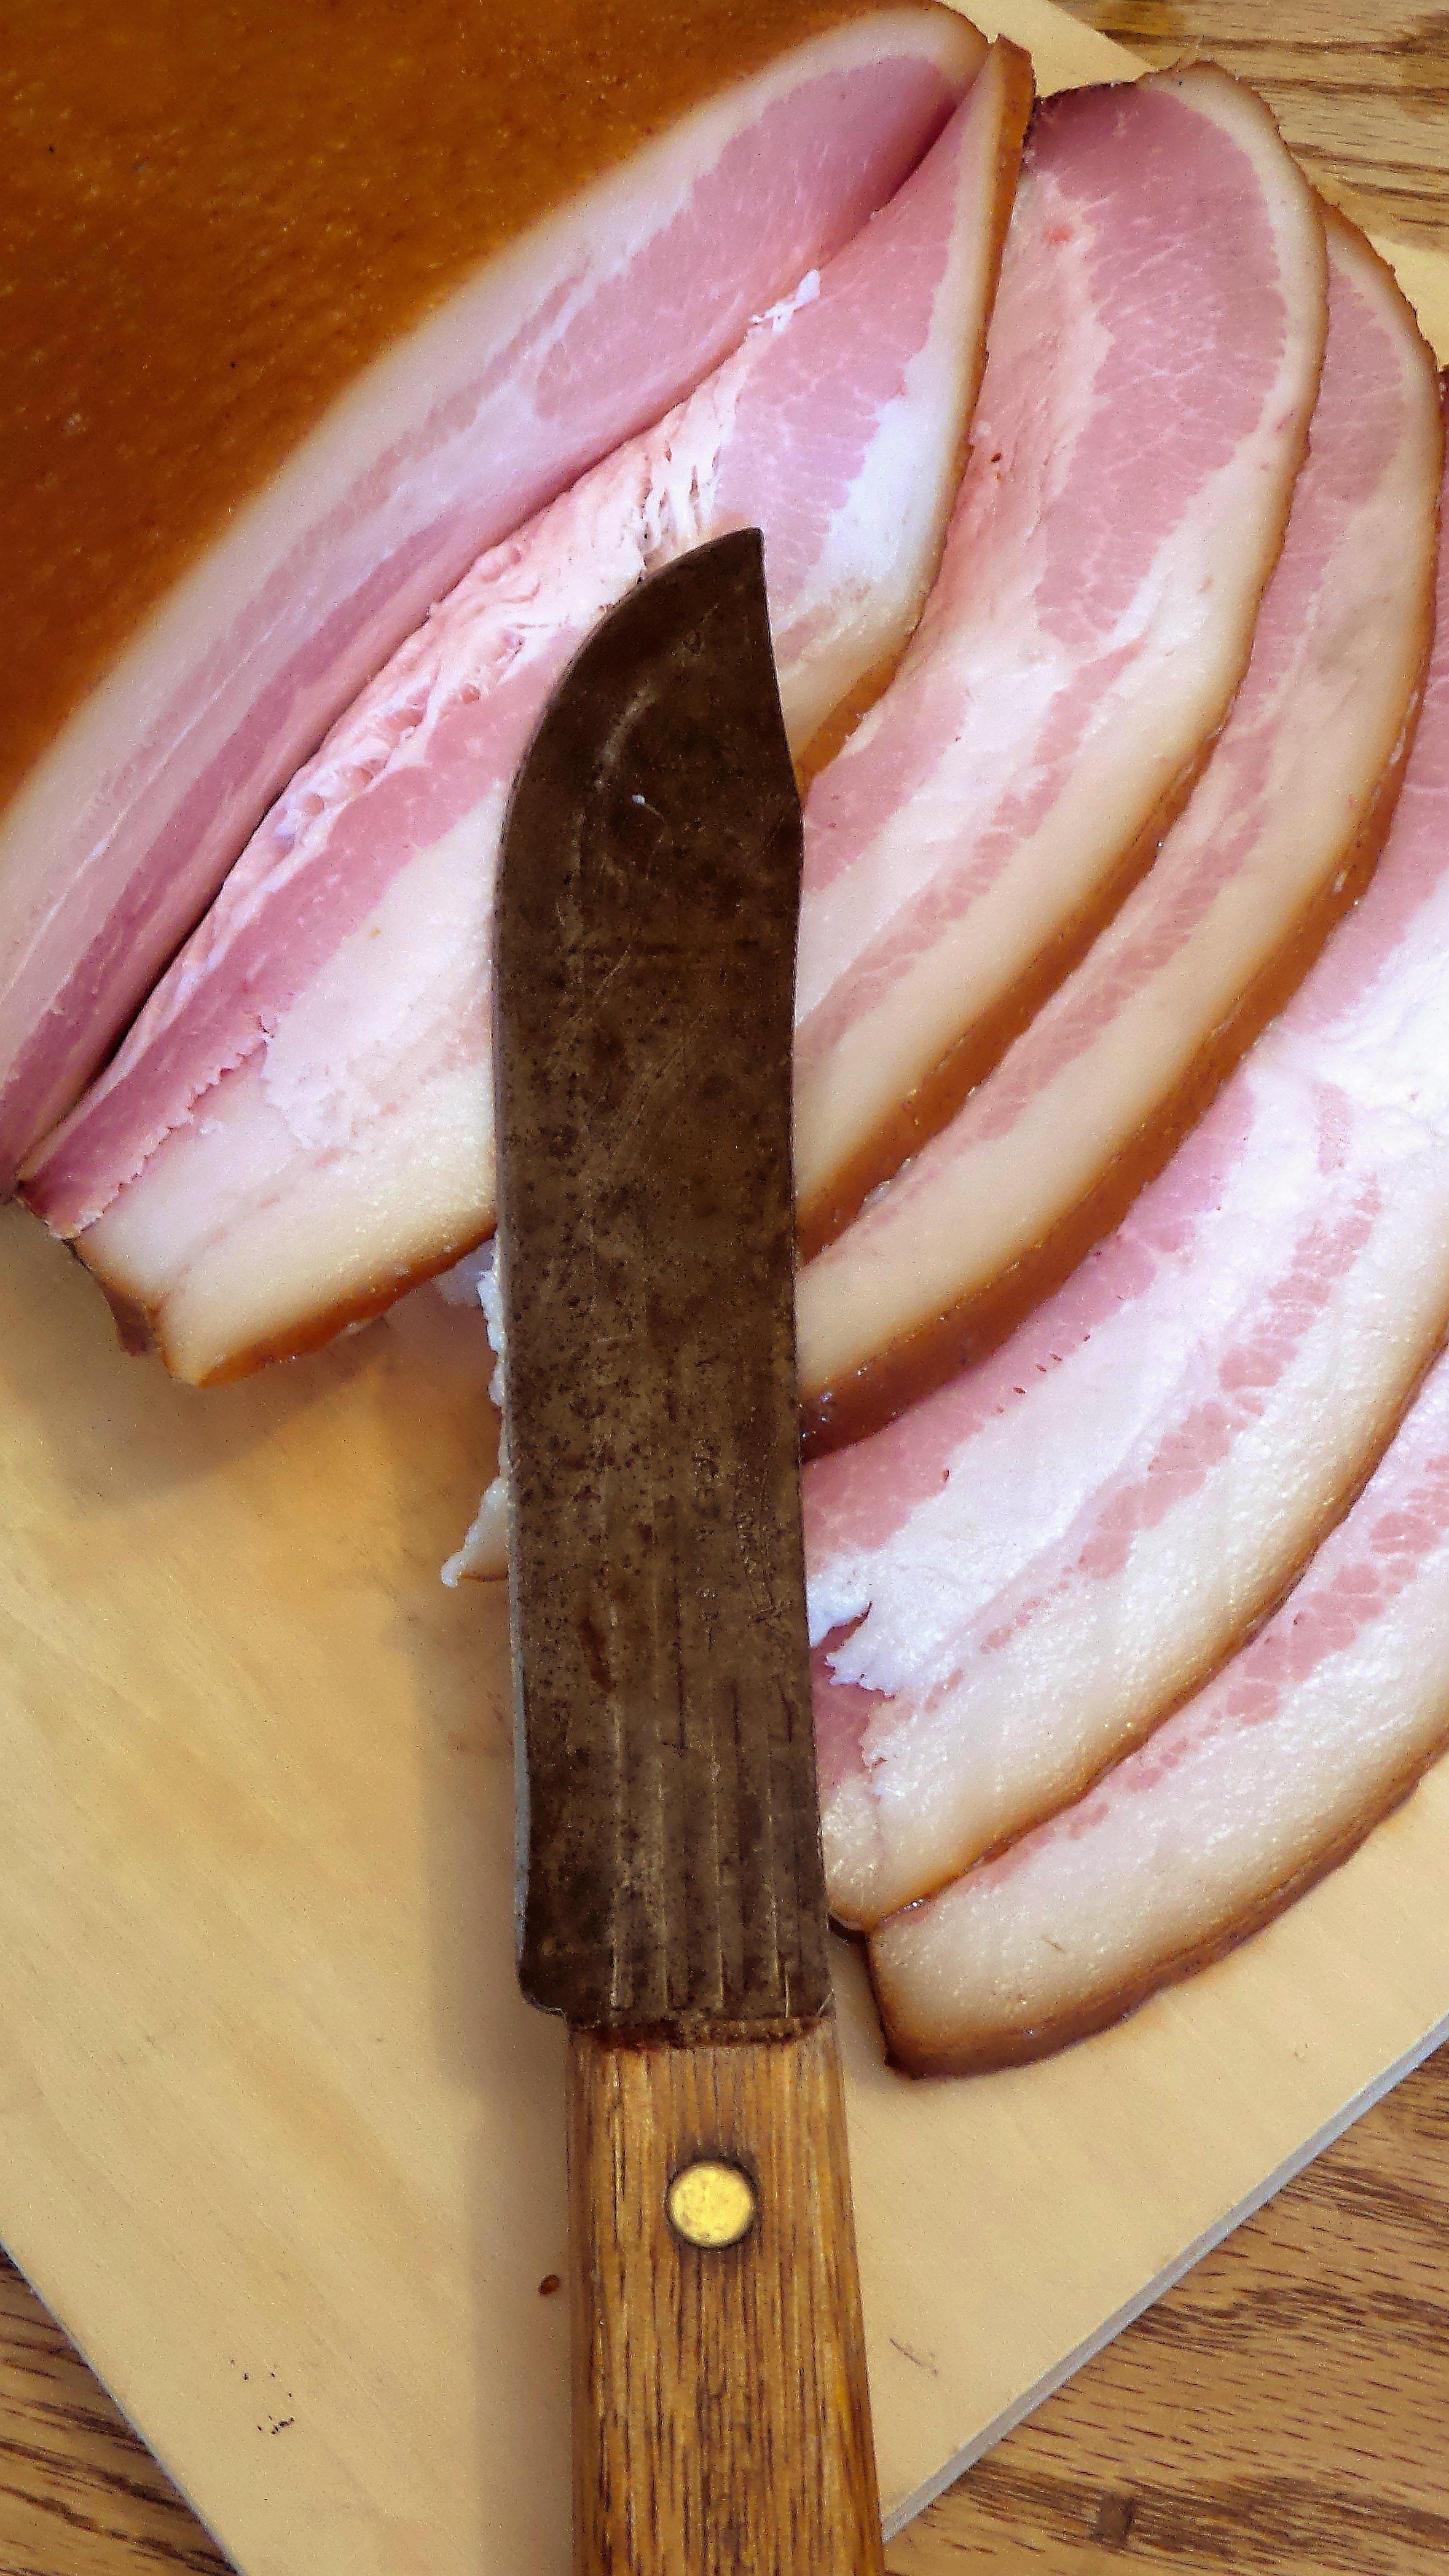 You can slice the bacon by hand with a sharp knife.